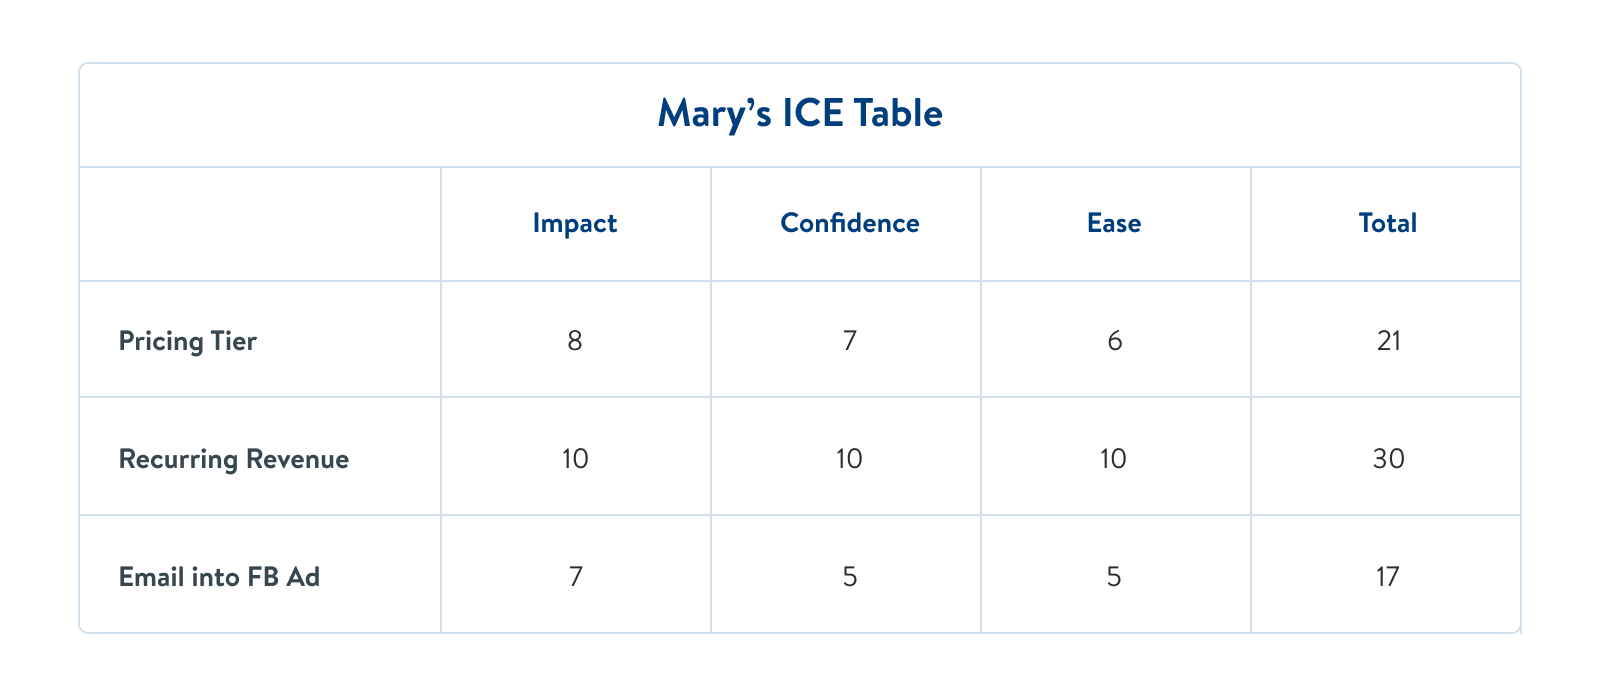 Mary's ICE Table: Pricing tier = 21, Recurring Revenue = 30, Email into FB Ad = 17.